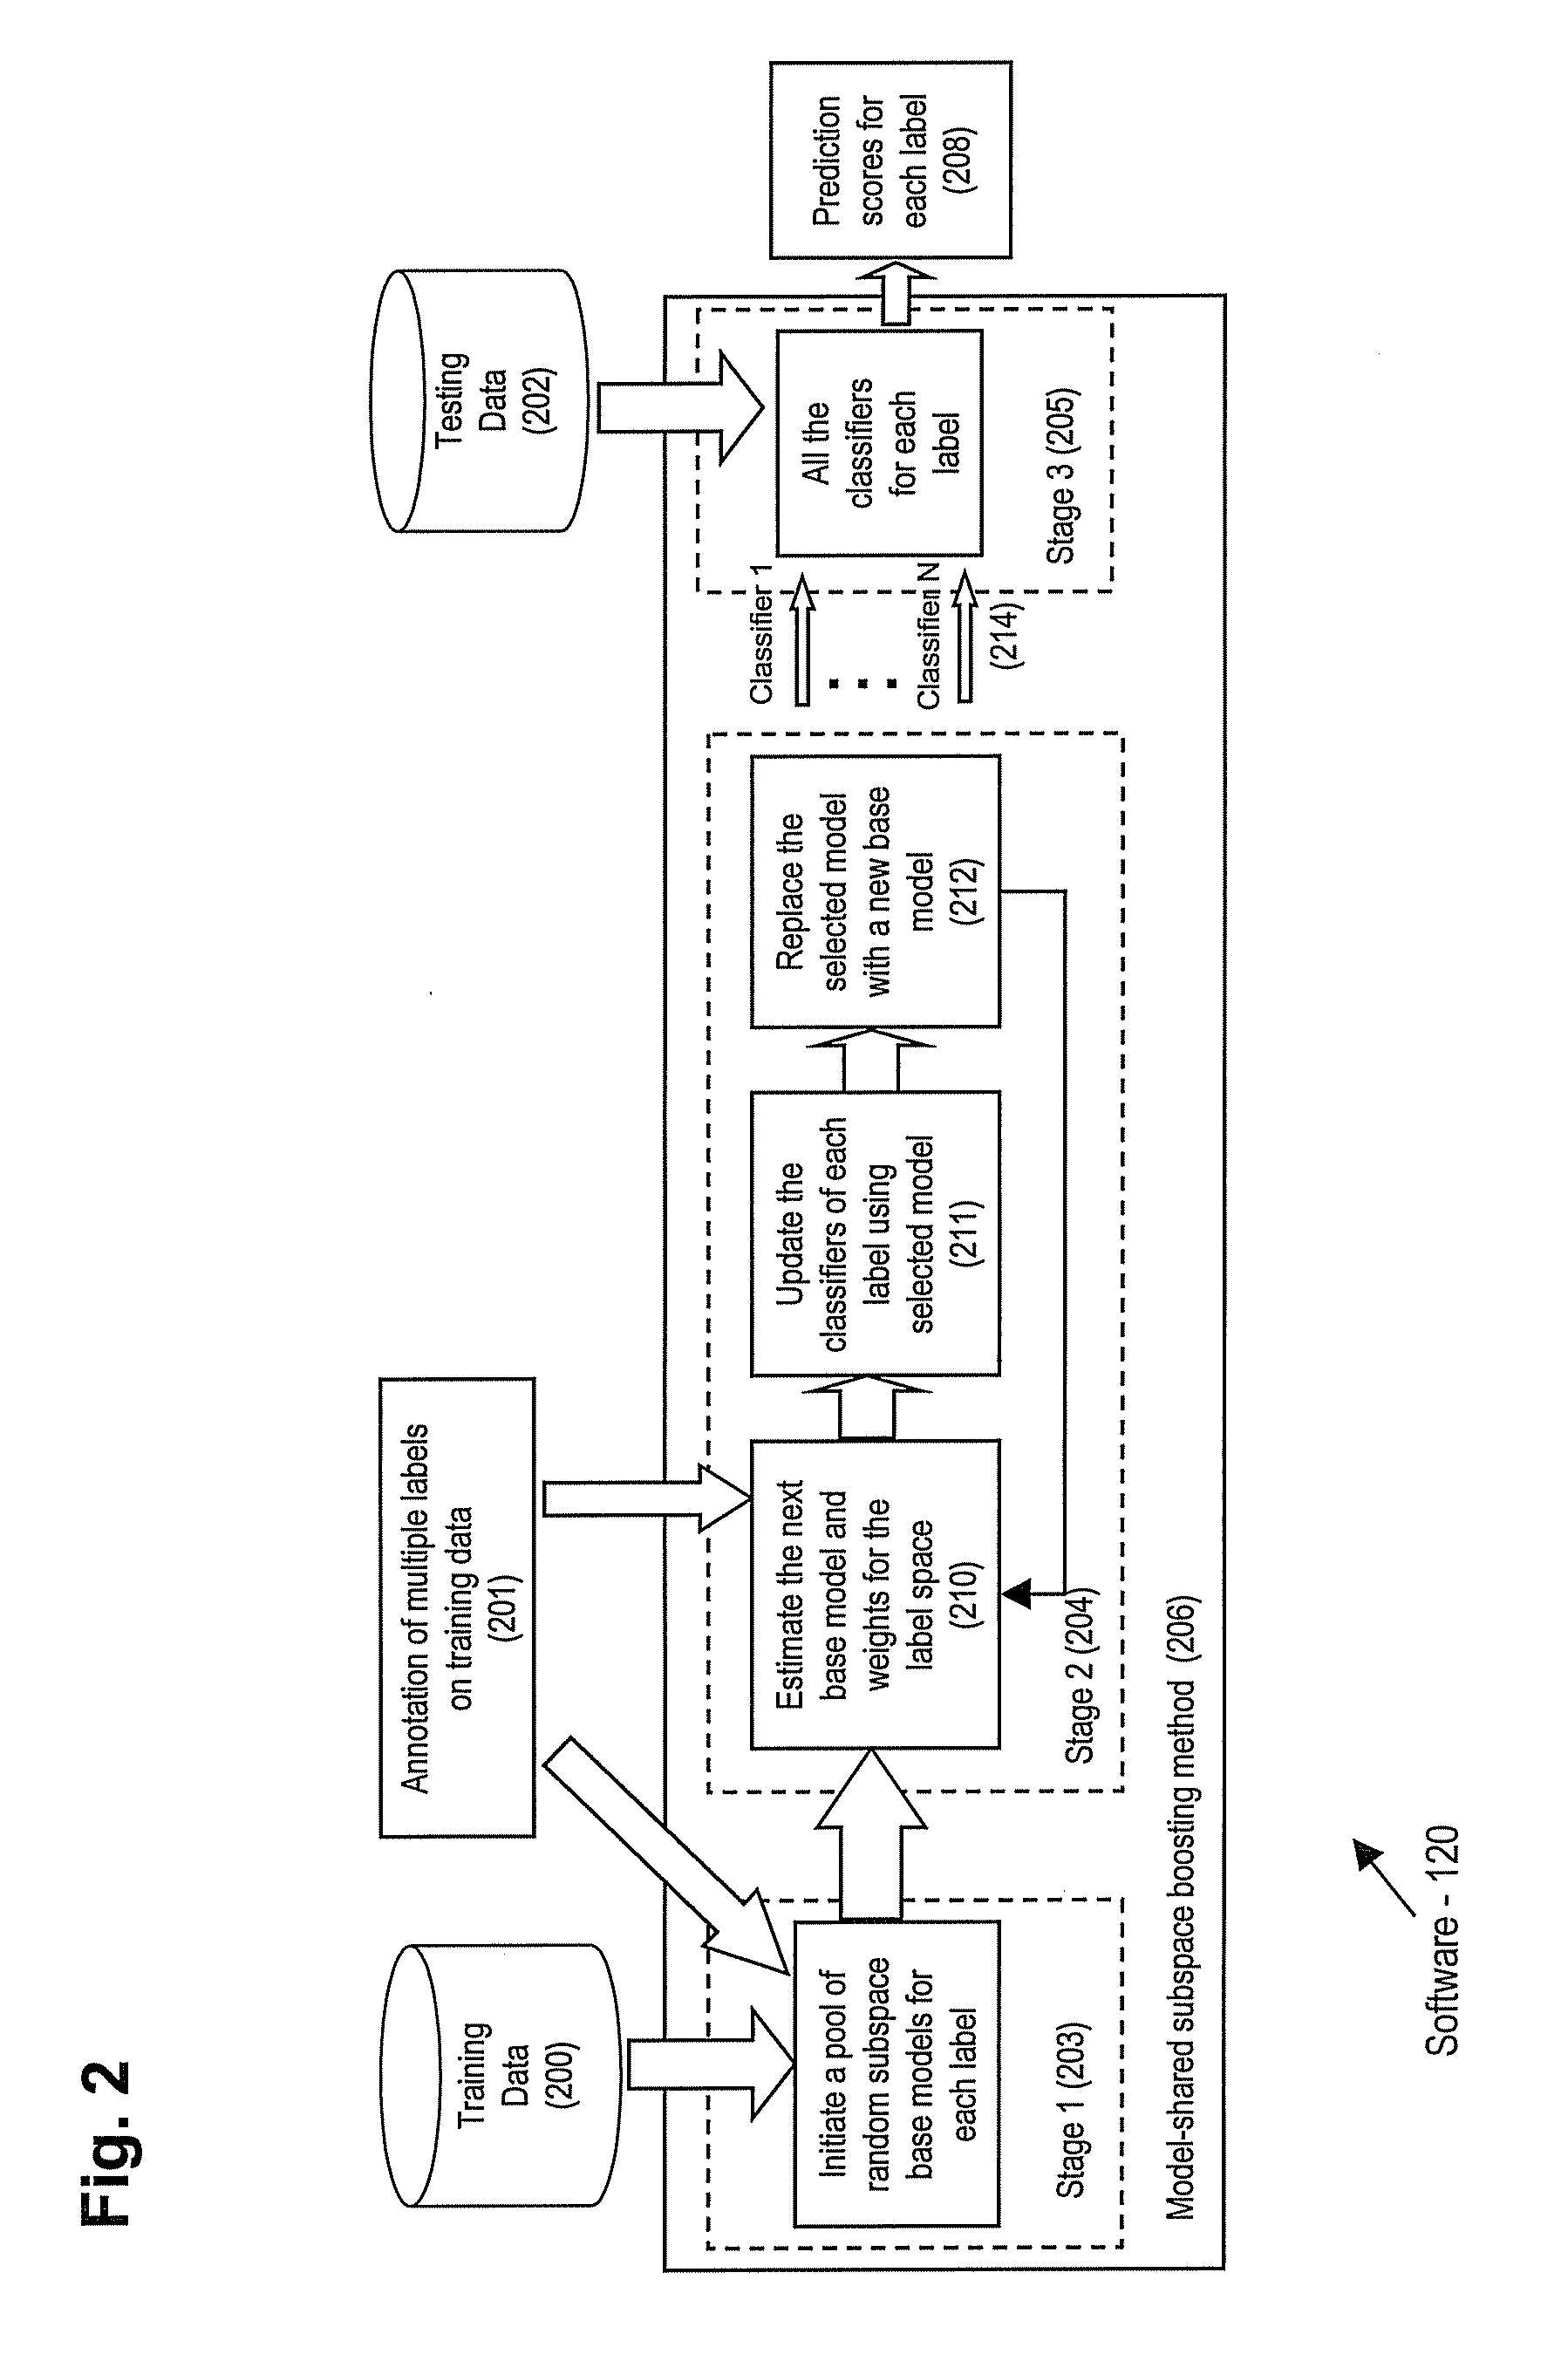 Method and apparatus for model-shared subspace boosting for multi-label classification